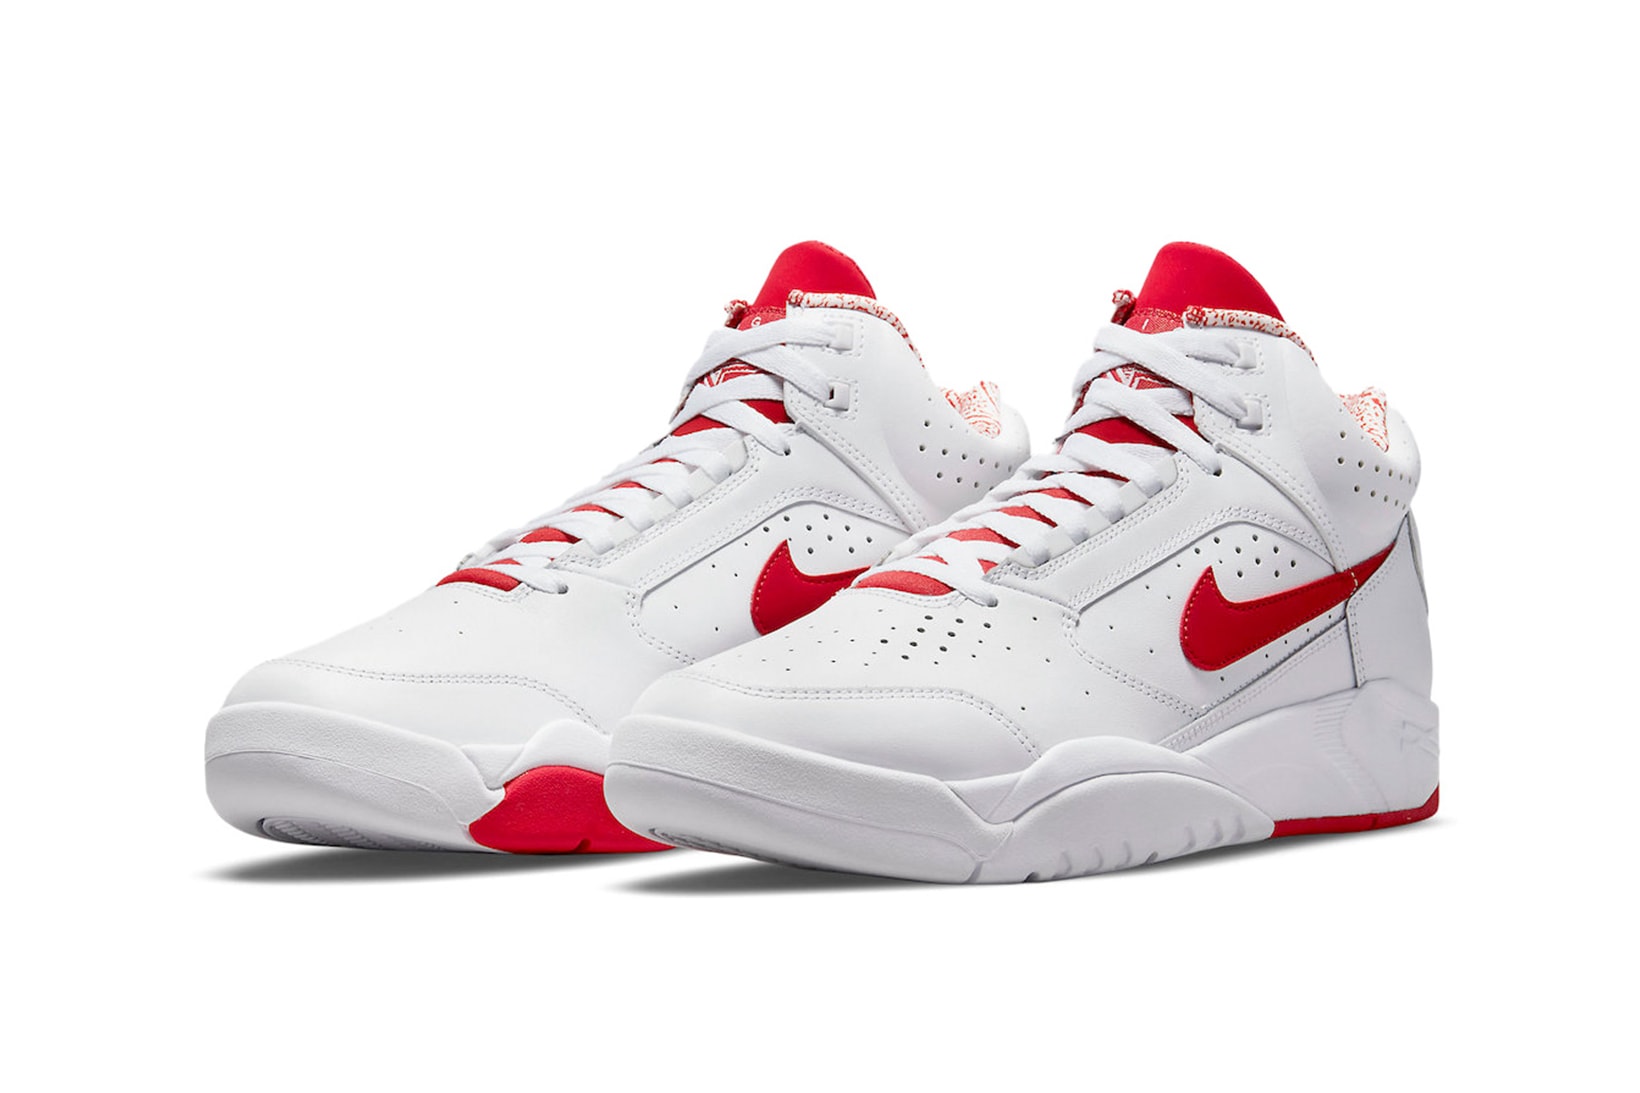 Nike Air Flight Lite Mid Scotty Pippen Sneakers Anniversary University Red Colorway Lateral View